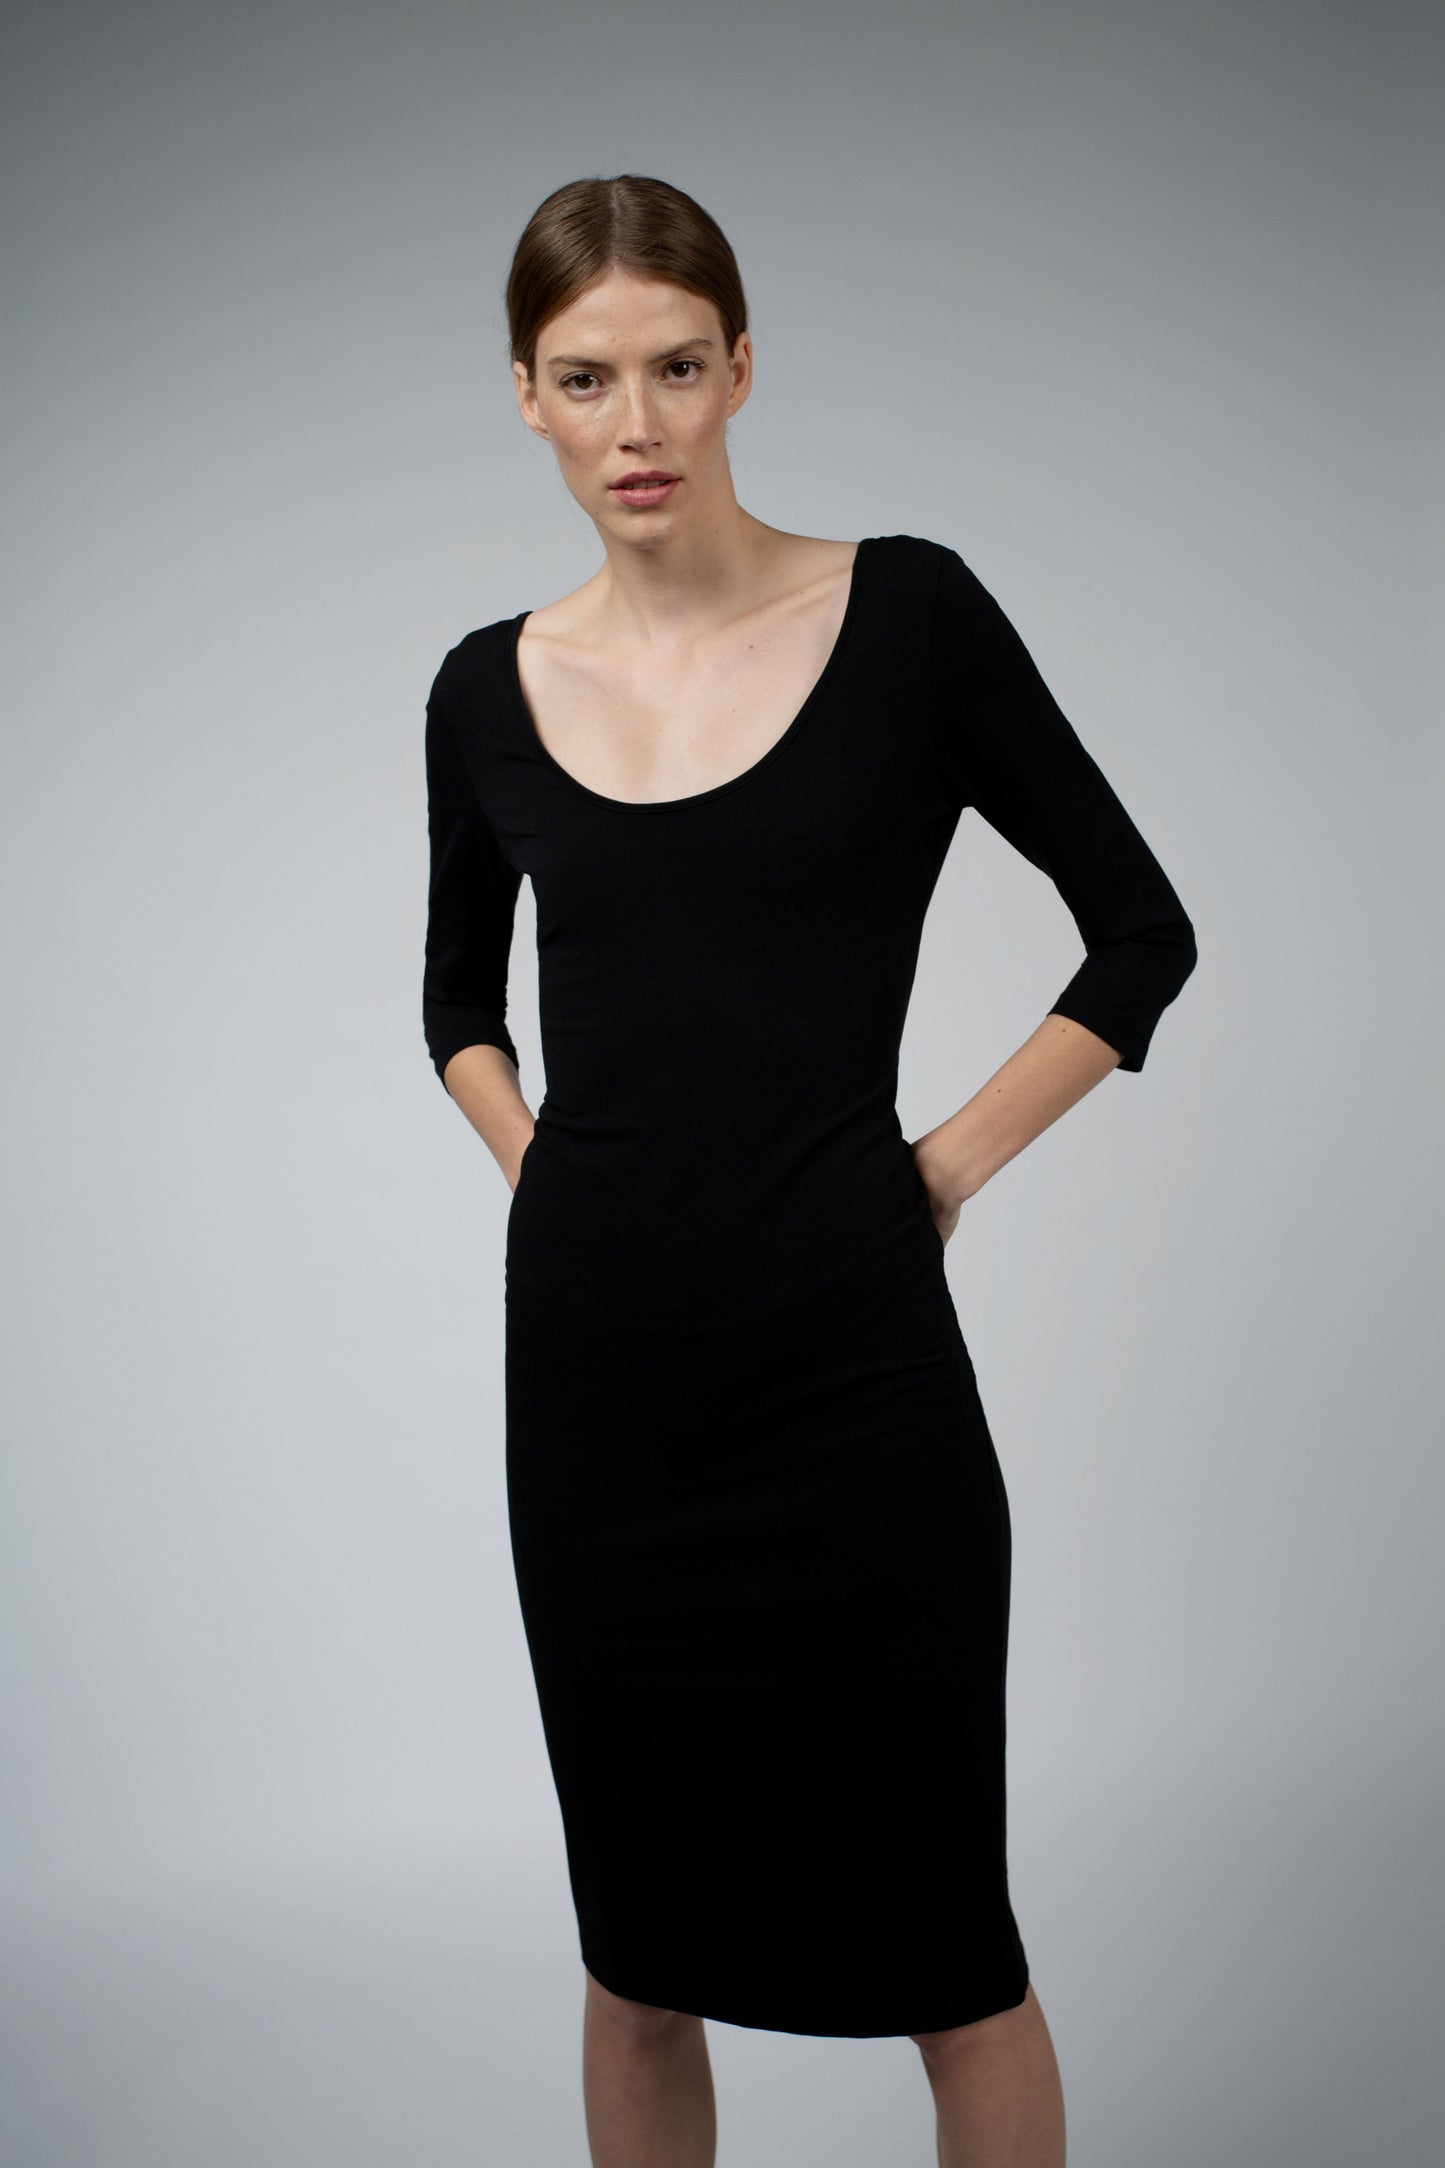 SANTICLER dresses are timeless pieces for a sustainable wordrobe ...